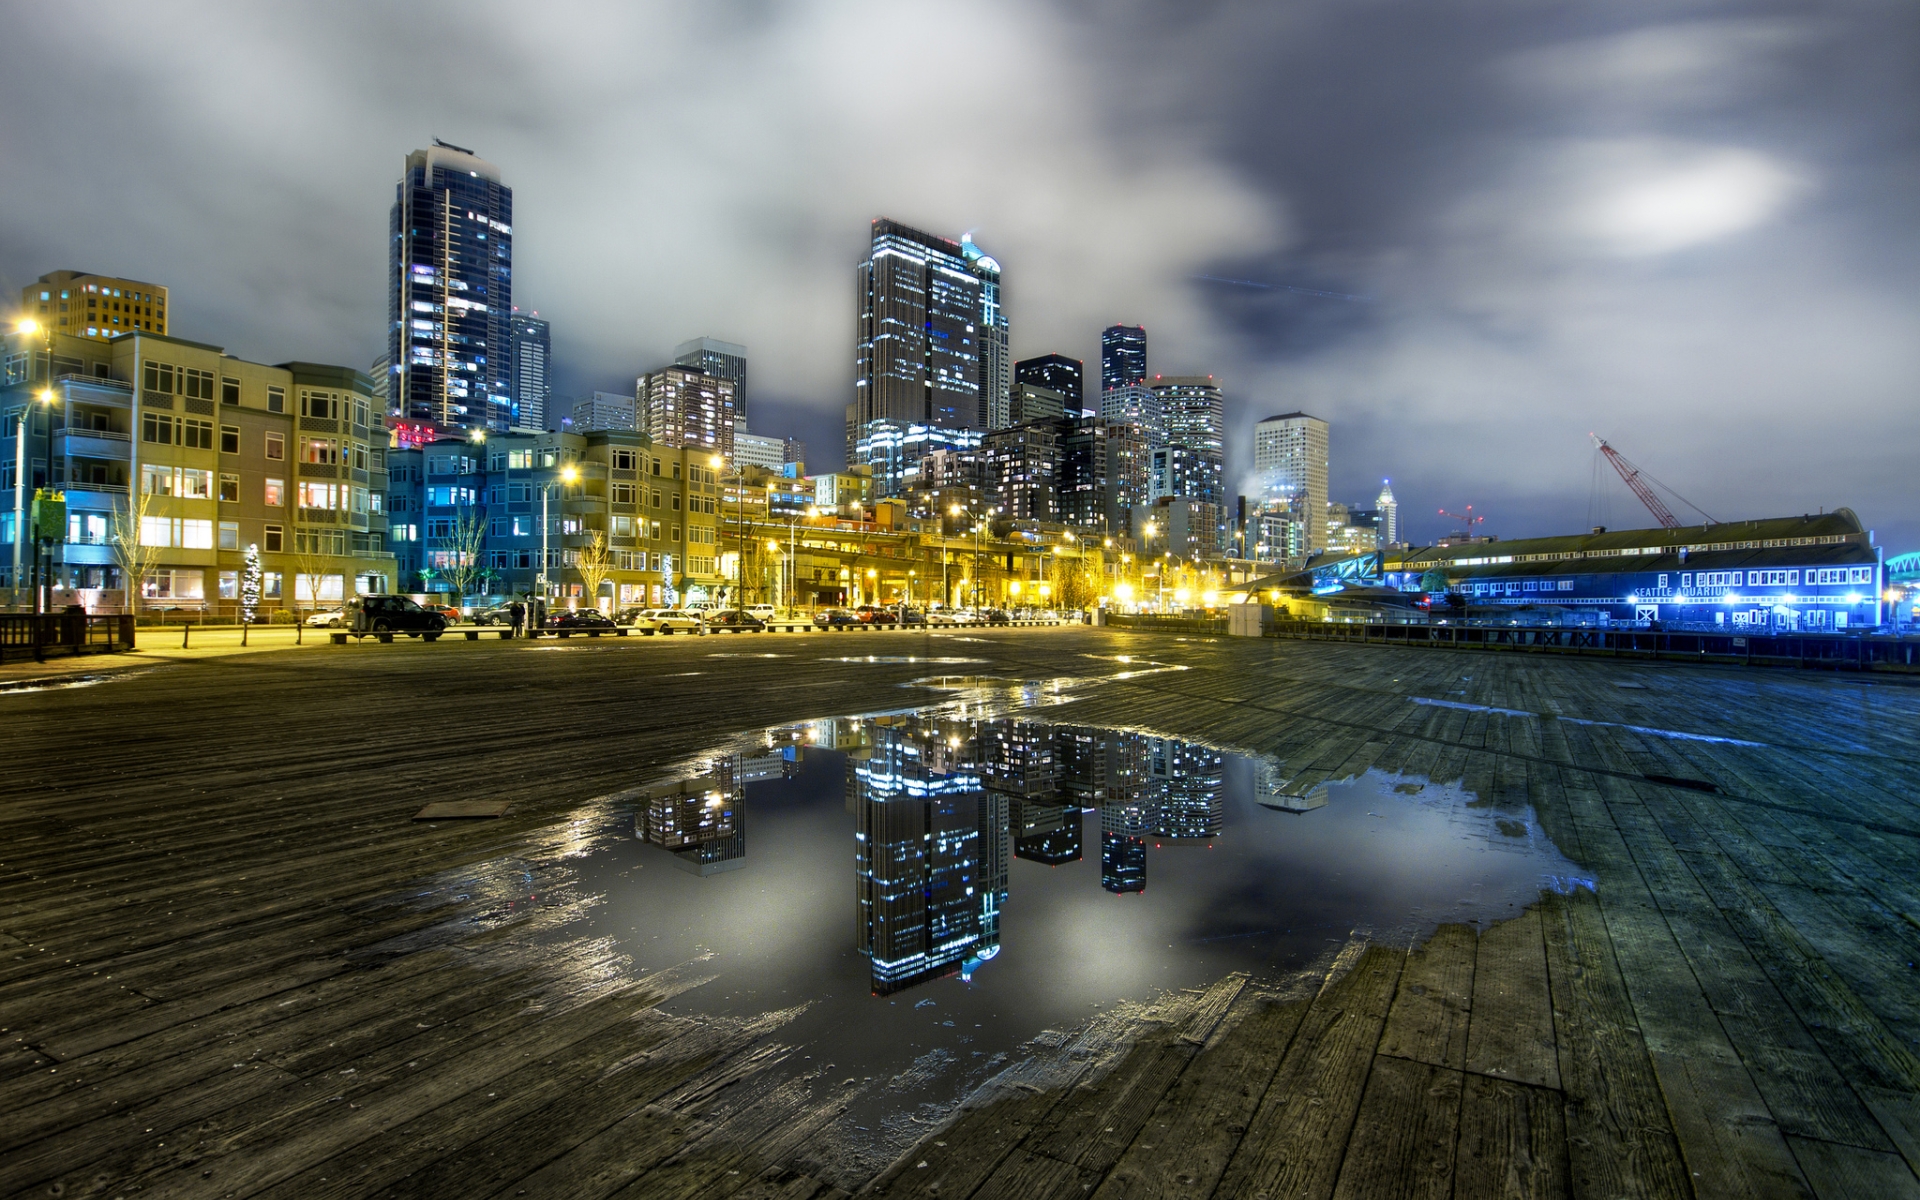 man made, city, building, dave morrow, night, puddle, reflection, seattle, skyscraper, cities